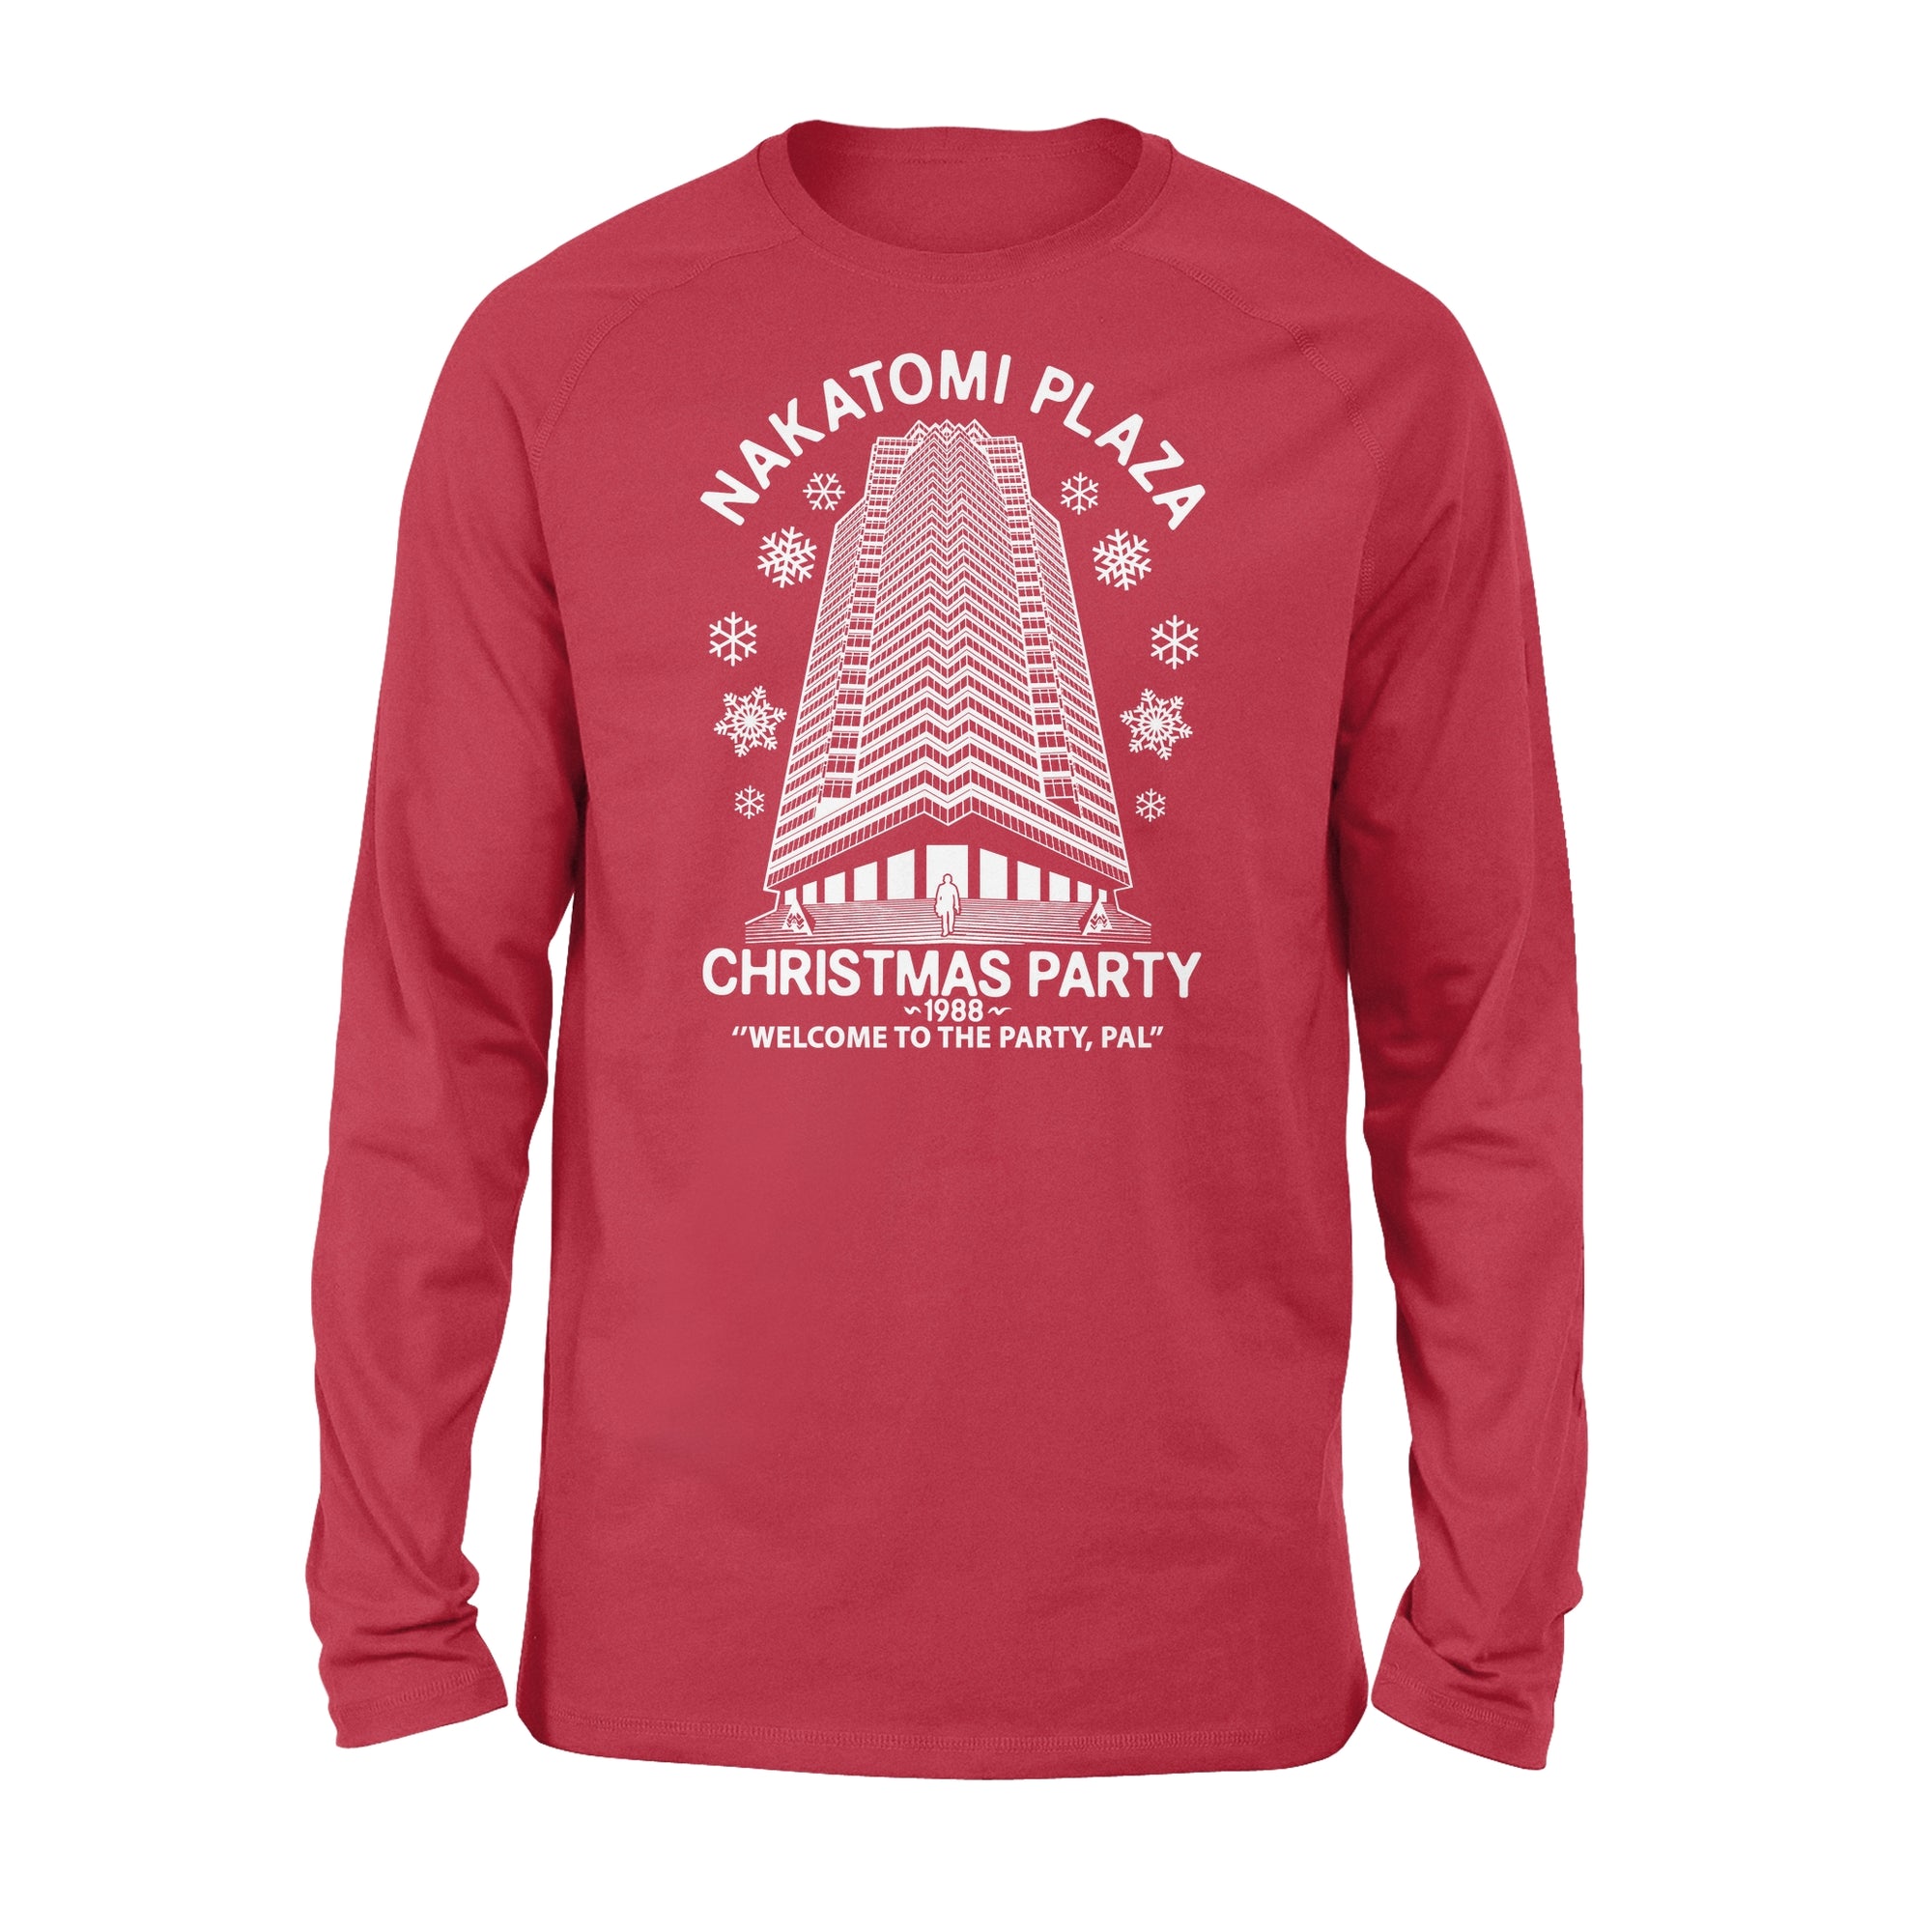 Christmas Party Nakatomi Plaza 1988 Welcome to The Christmas Party Die Hard Standard Long Sleeve Shirt